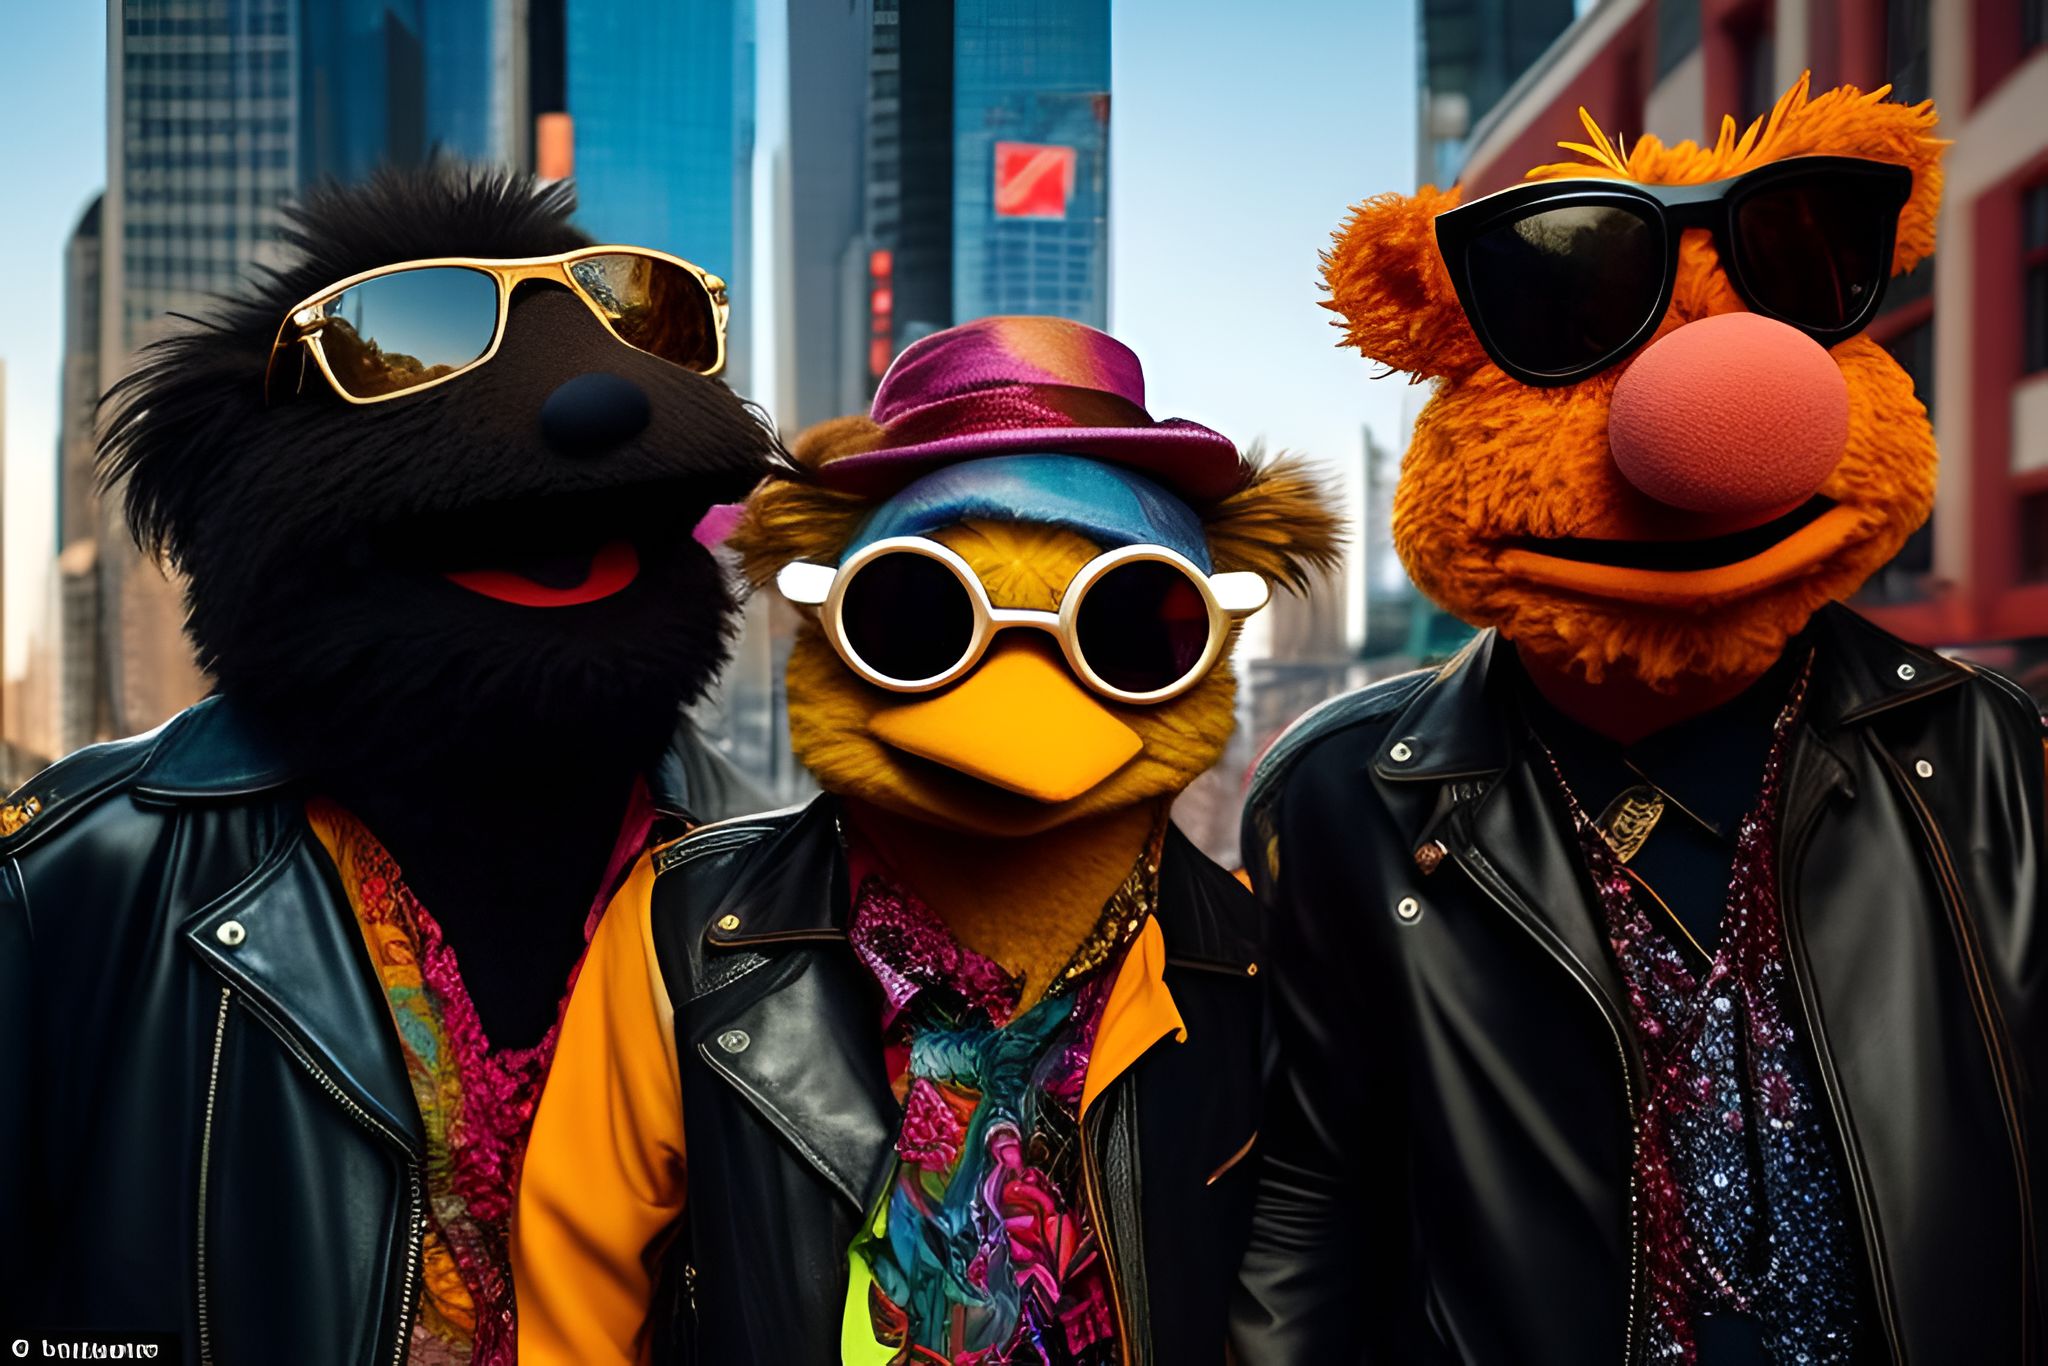 addison: Two groovy Muppets stood under a neon-lit sign, their ...